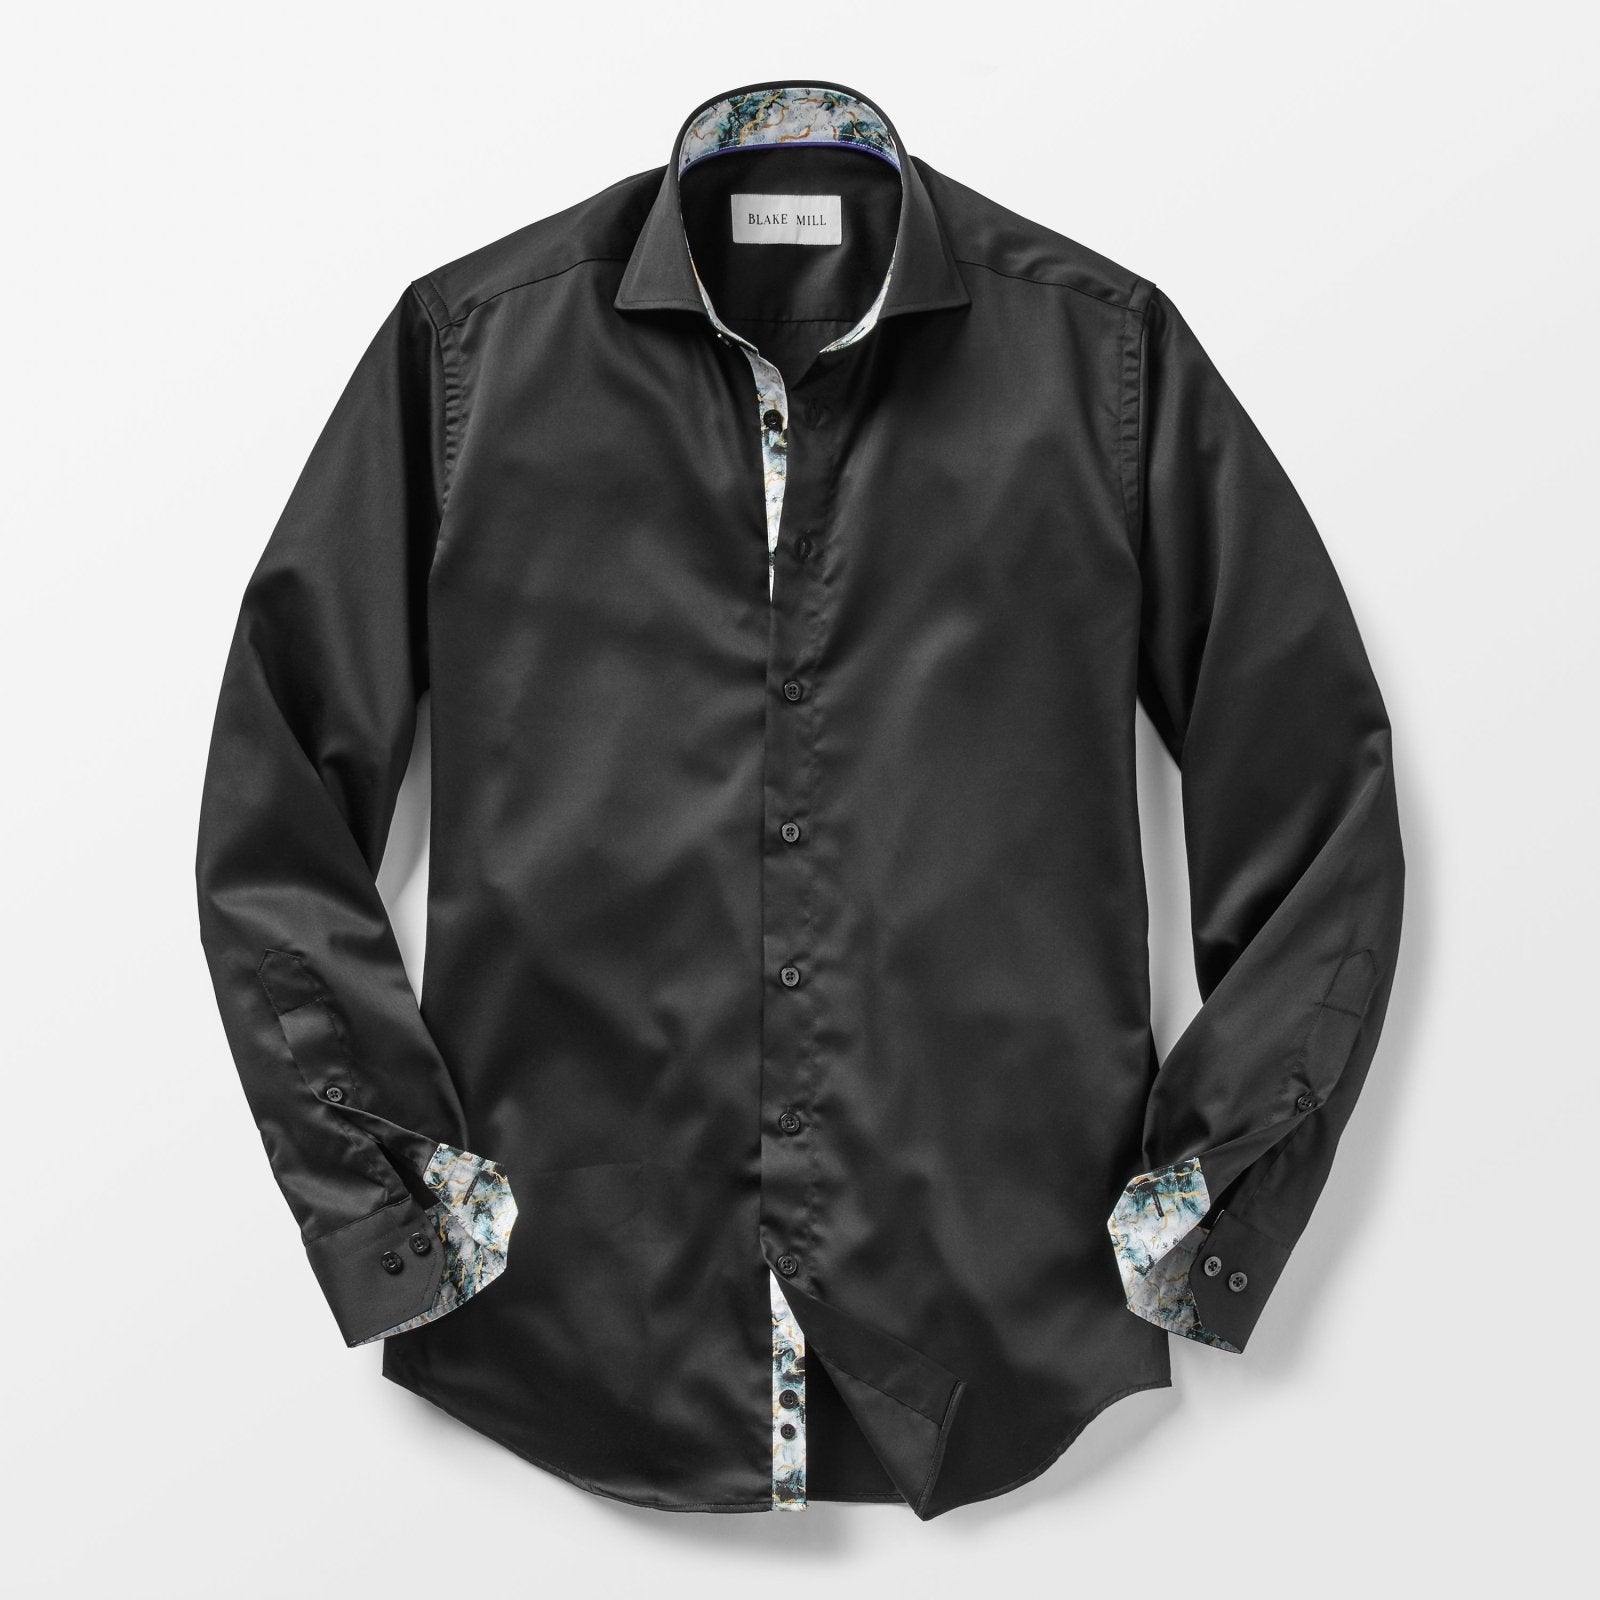 Black with Thunderstorm Accents Shirt - Blake Mill